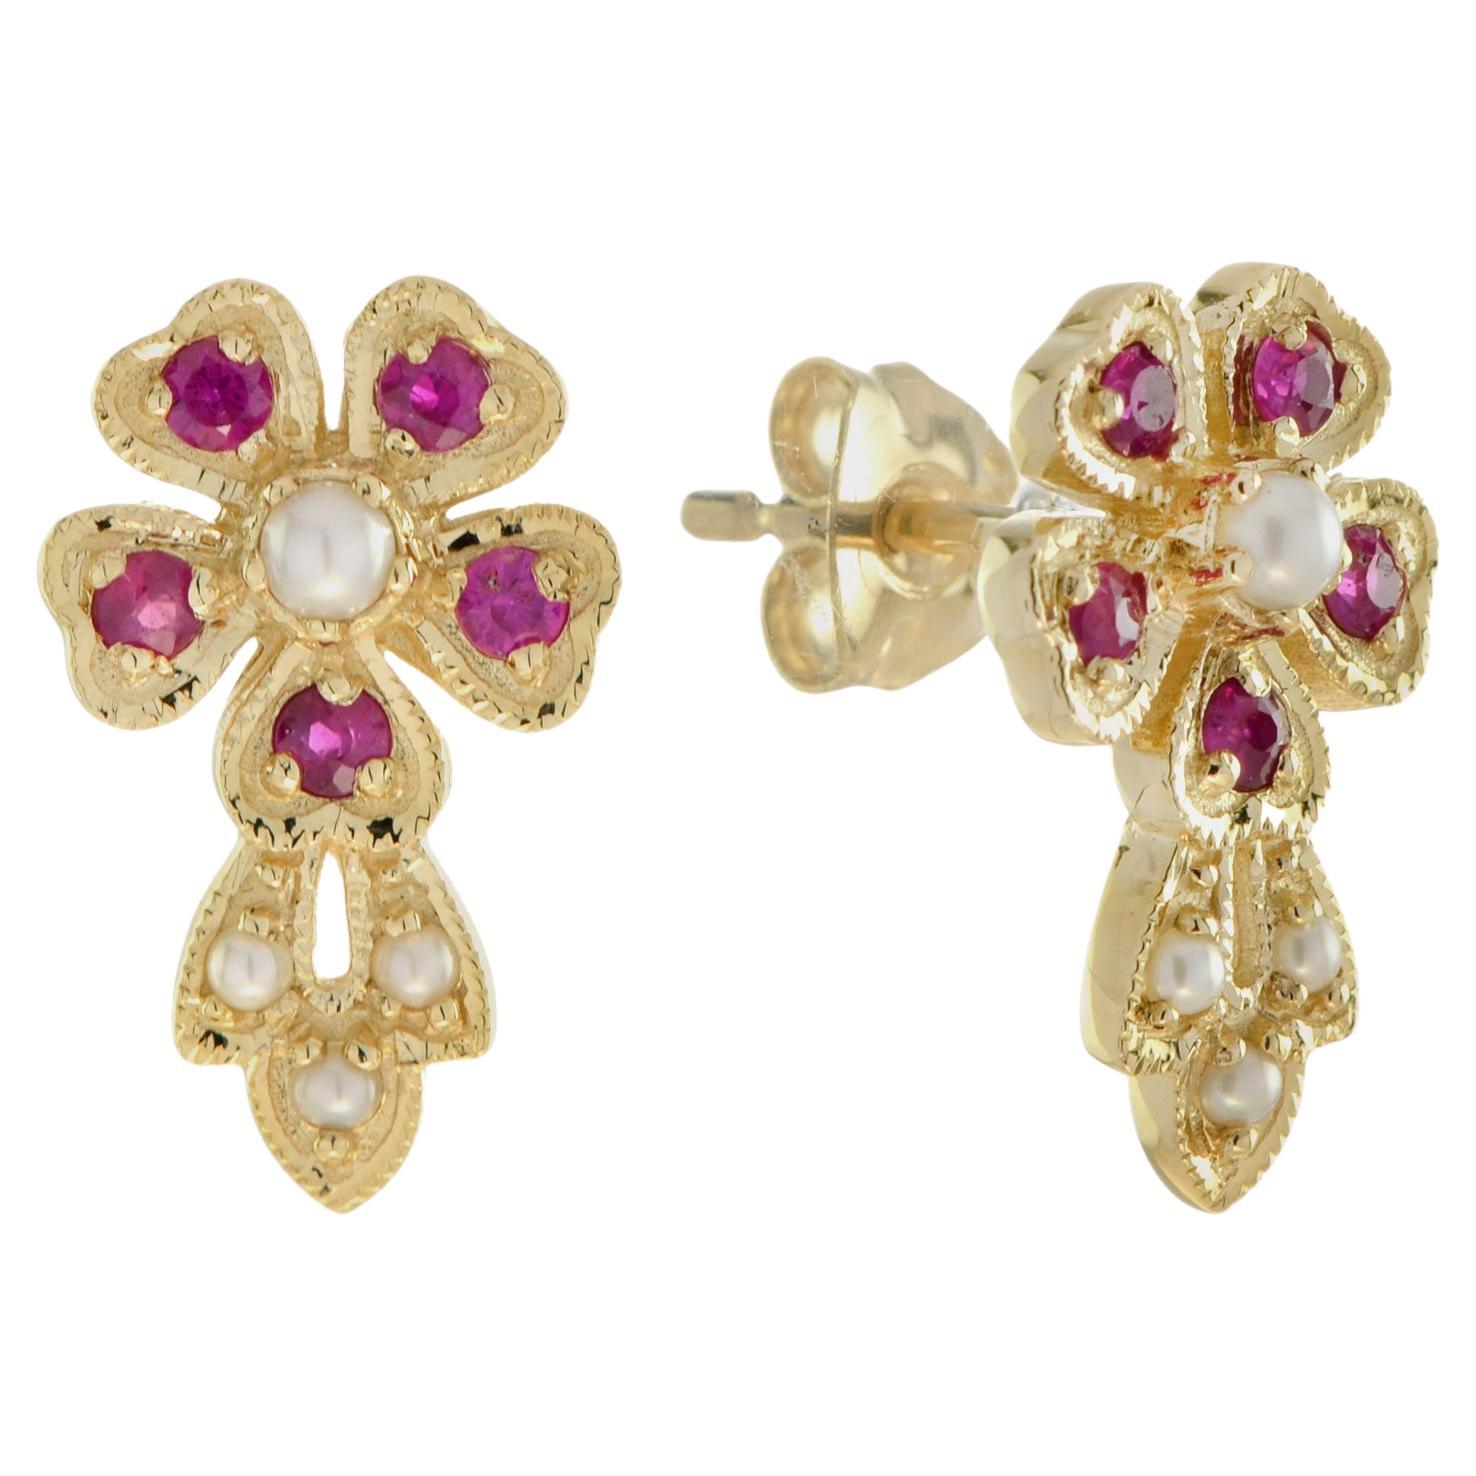 Natural Pearl and Ruby Vintage Style Floral Stud Earrings in Solid 9K Gold